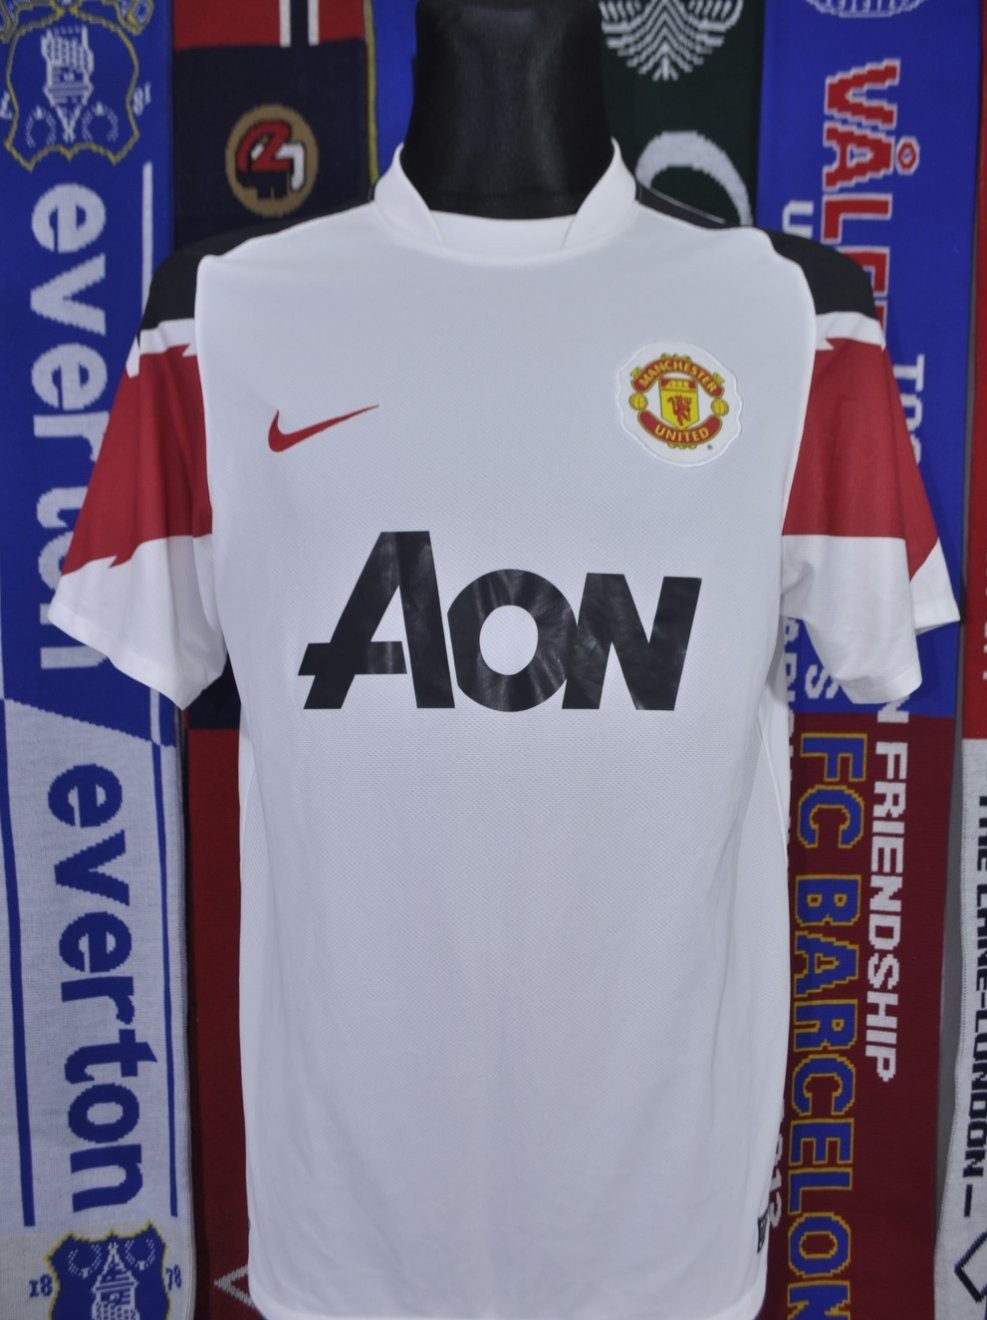 Manchester United Away football shirt 2010 - 2011. Sponsored by AON